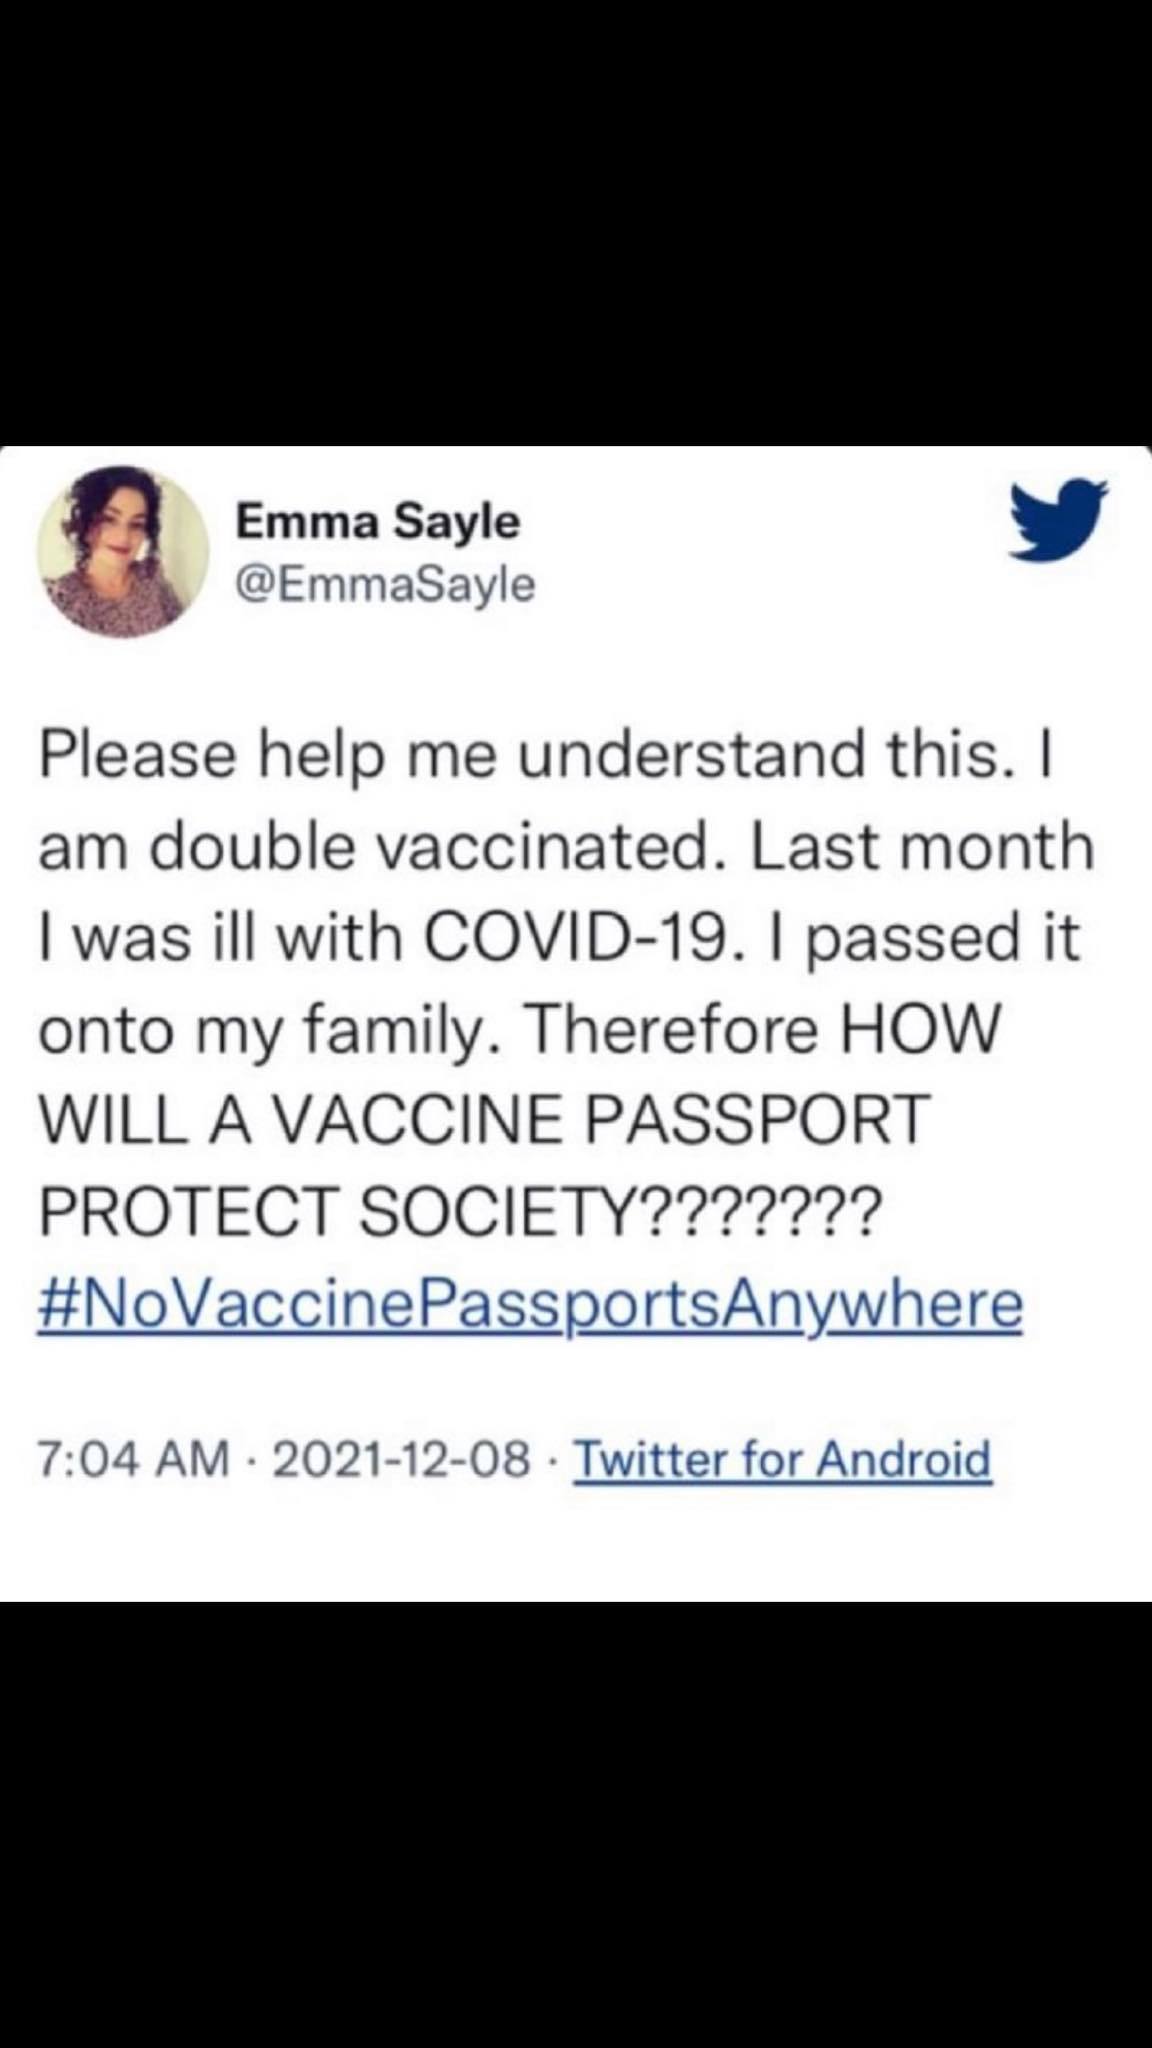 How Will A Vaccine Passport Protect